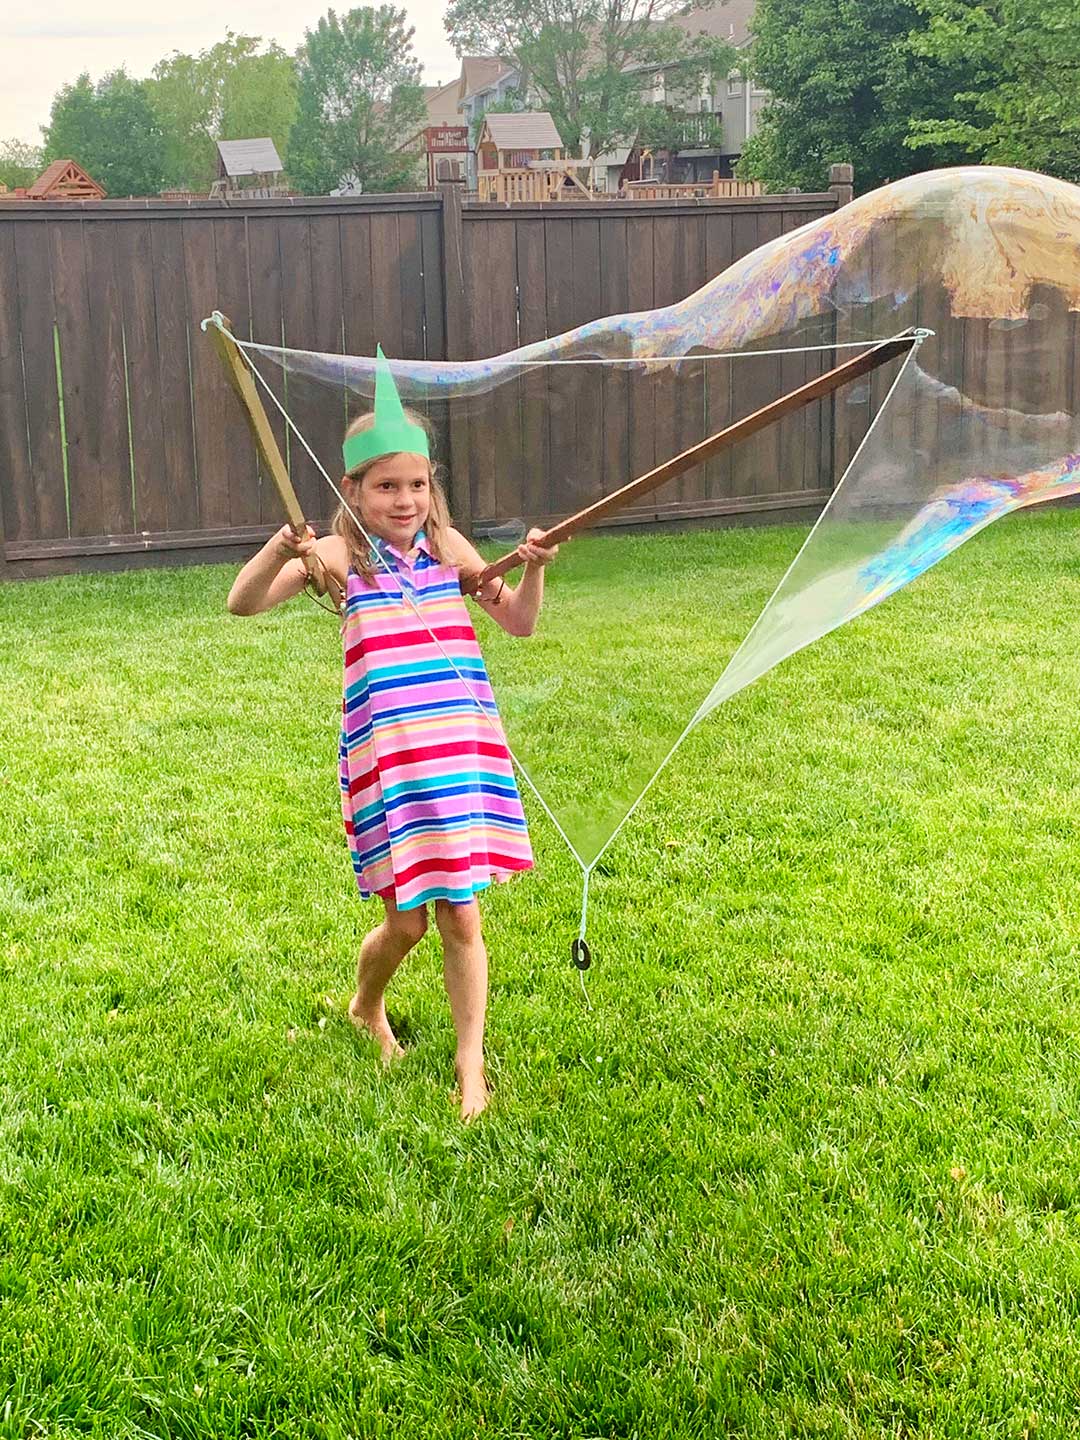 Young girl with striped dress and unicorn crown plays with large bubble wand in the back yard.